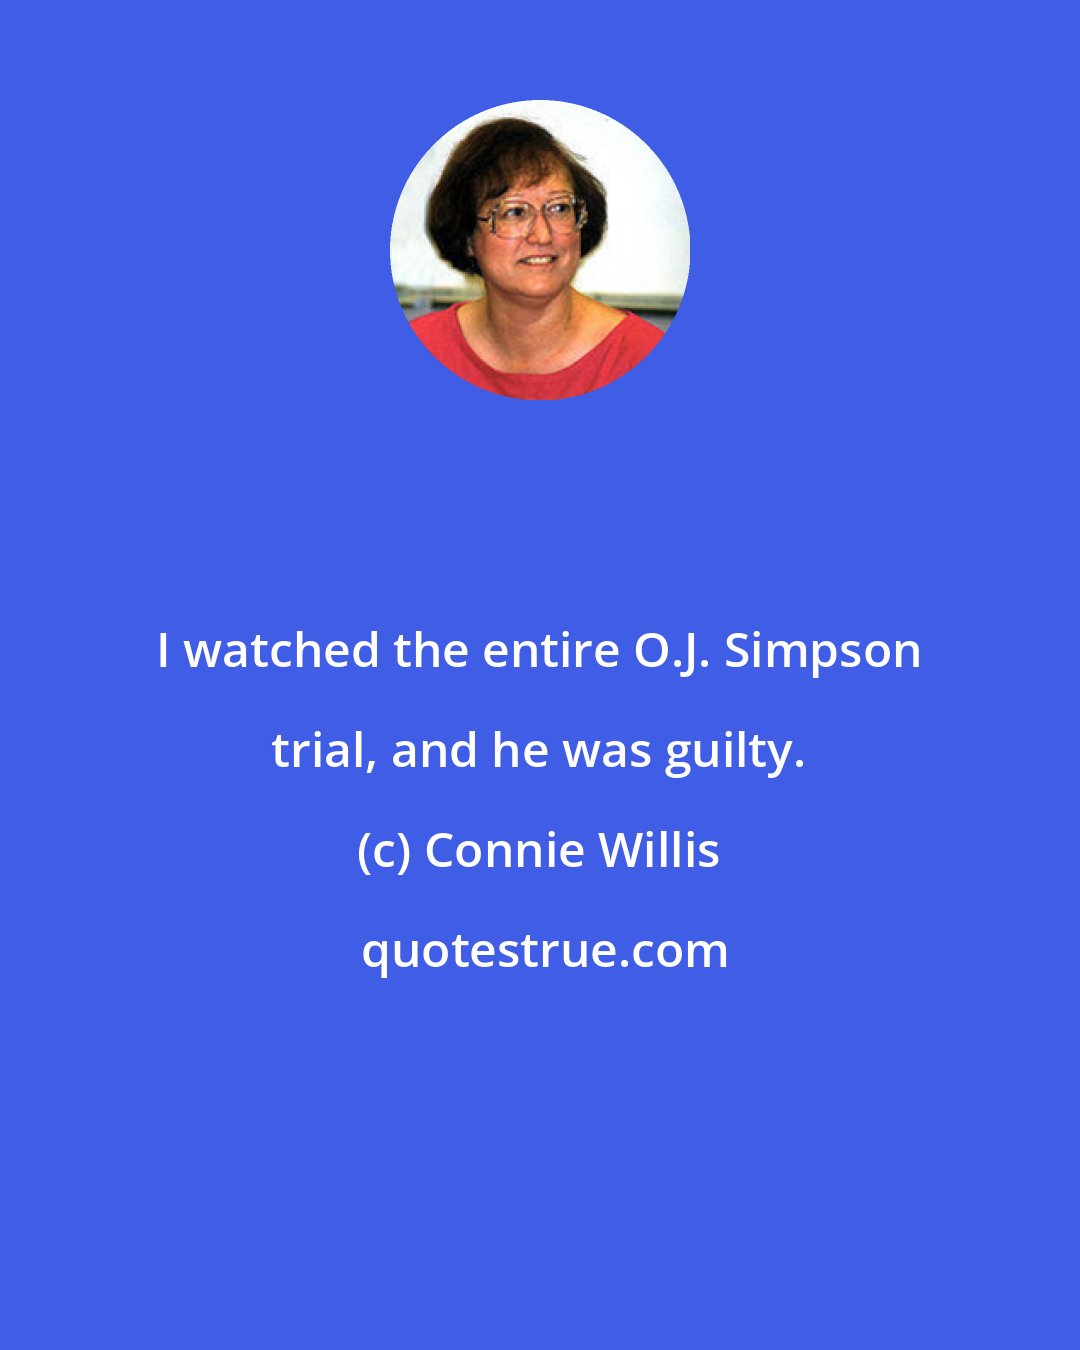 Connie Willis: I watched the entire O.J. Simpson trial, and he was guilty.